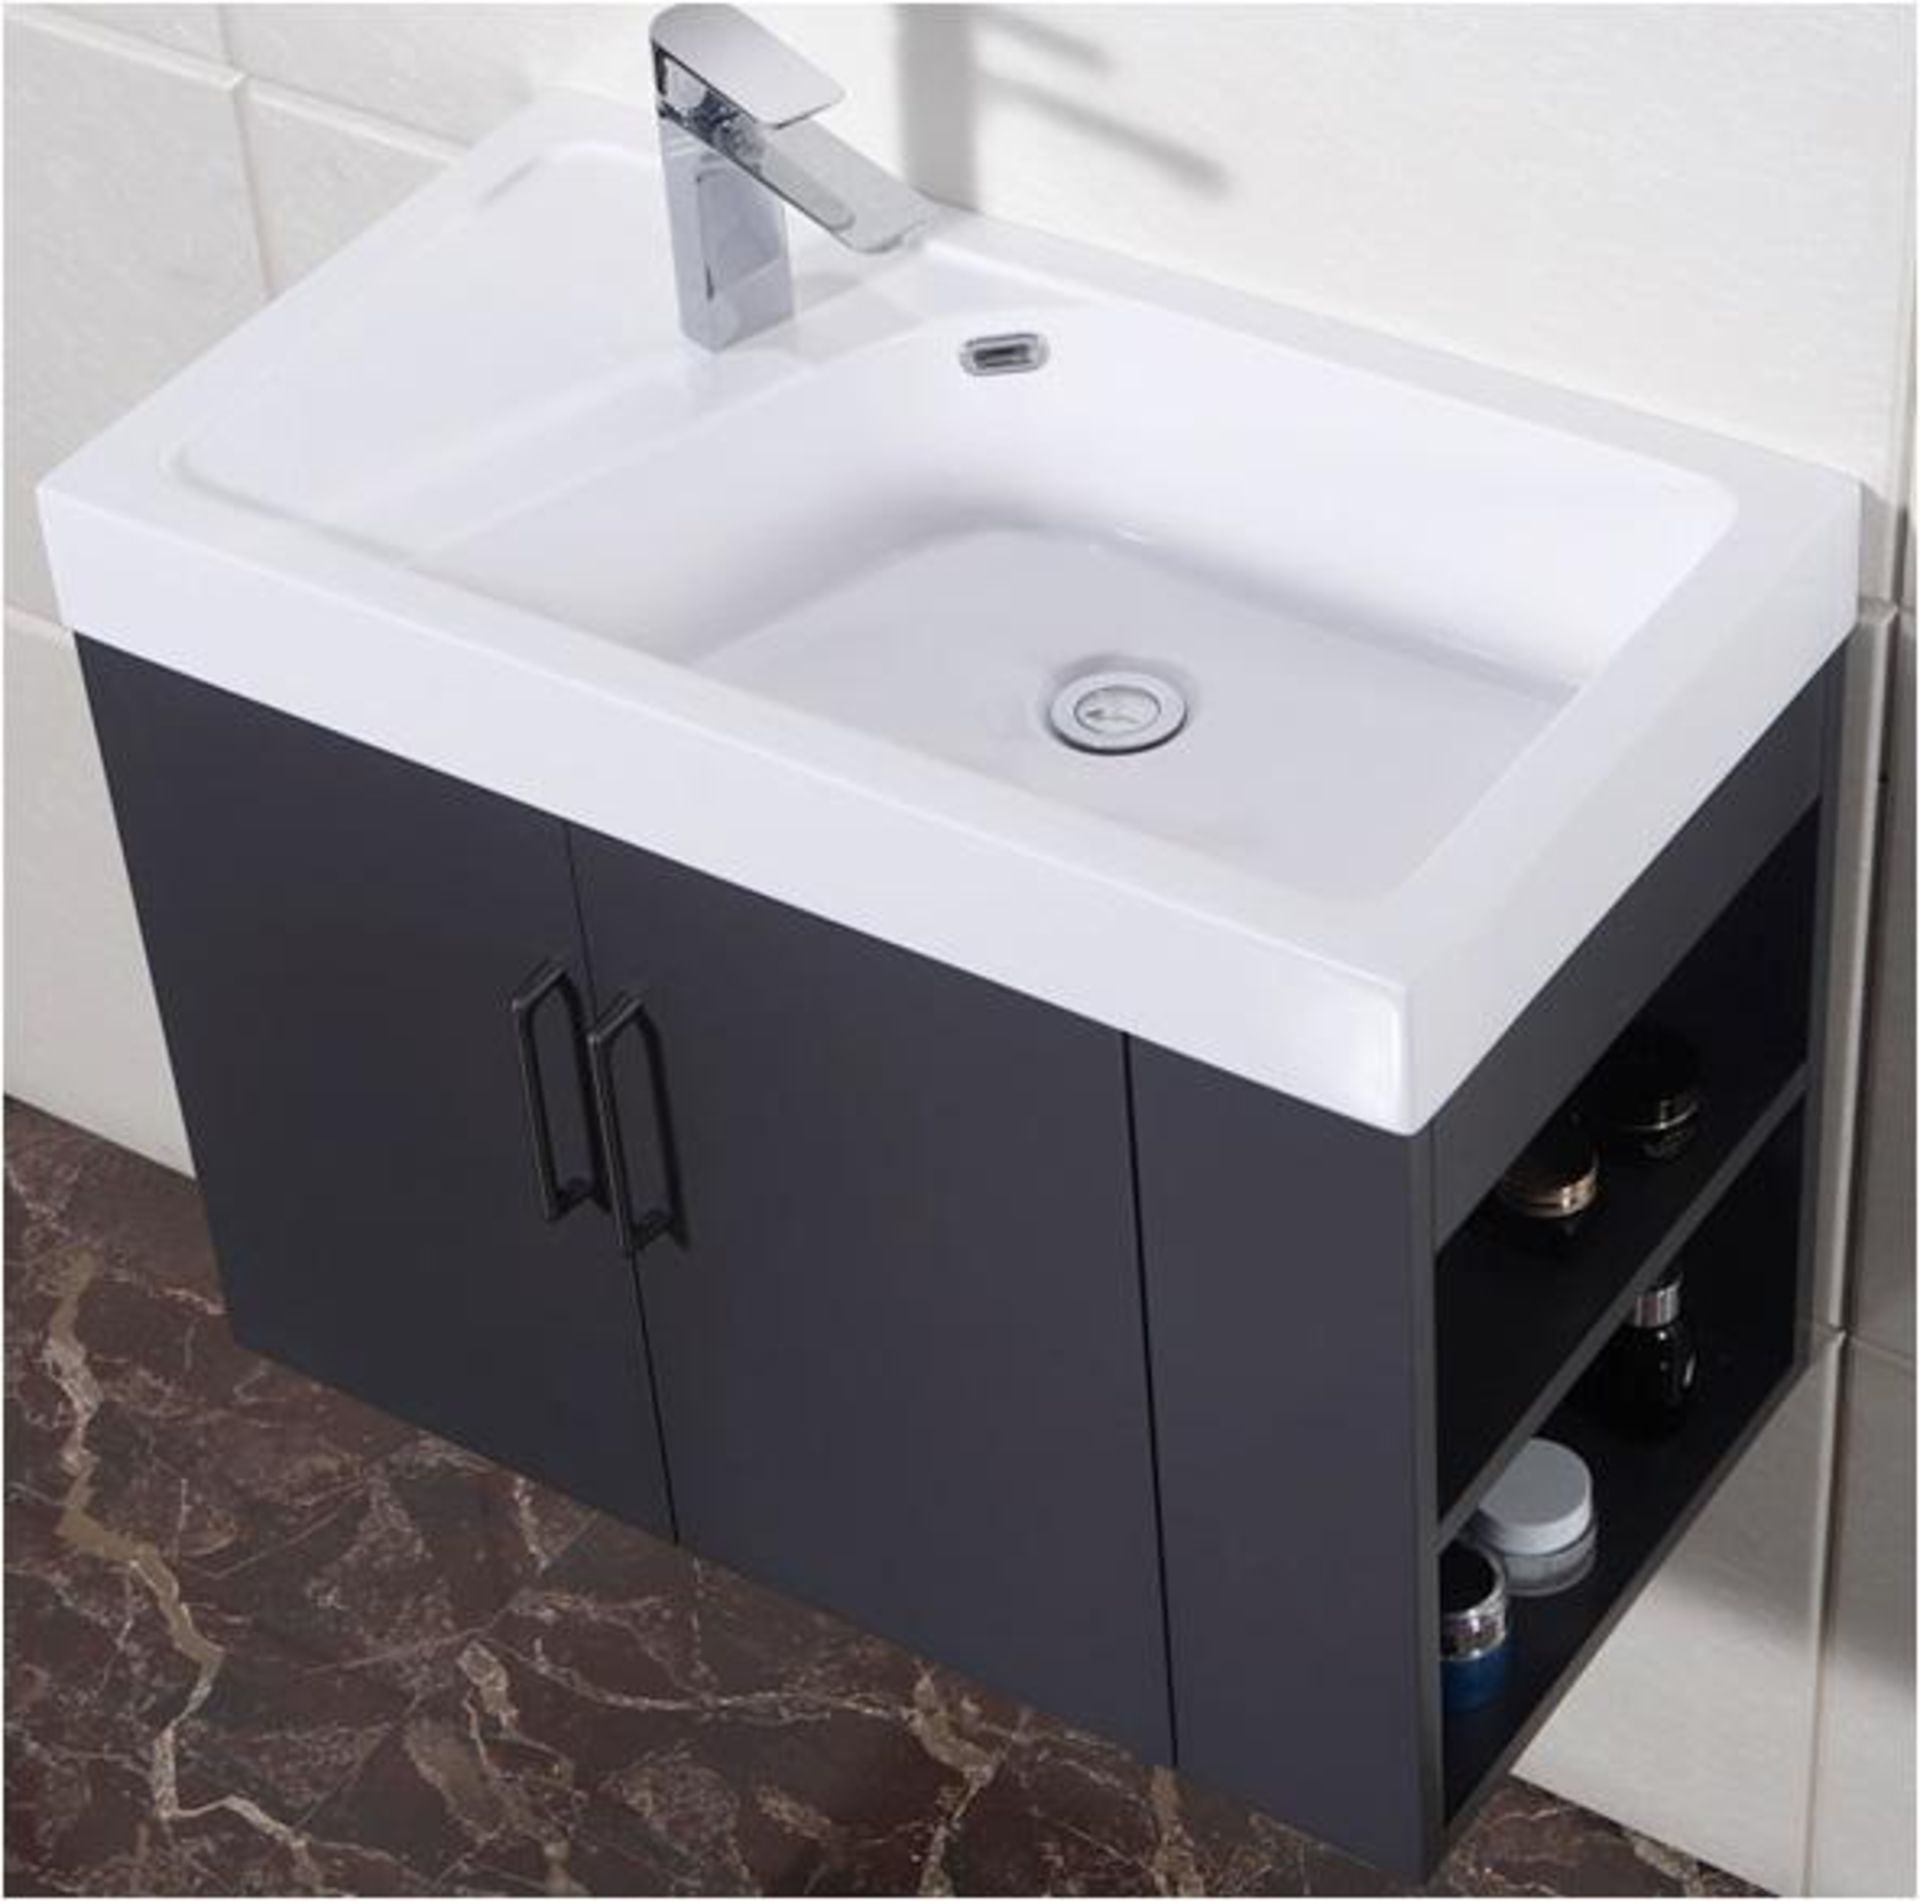 1 x Wall Hung Bathroom Vanity Unit Featuring A Gelcoat Coated Basin And Soft Close Drawers - Finish